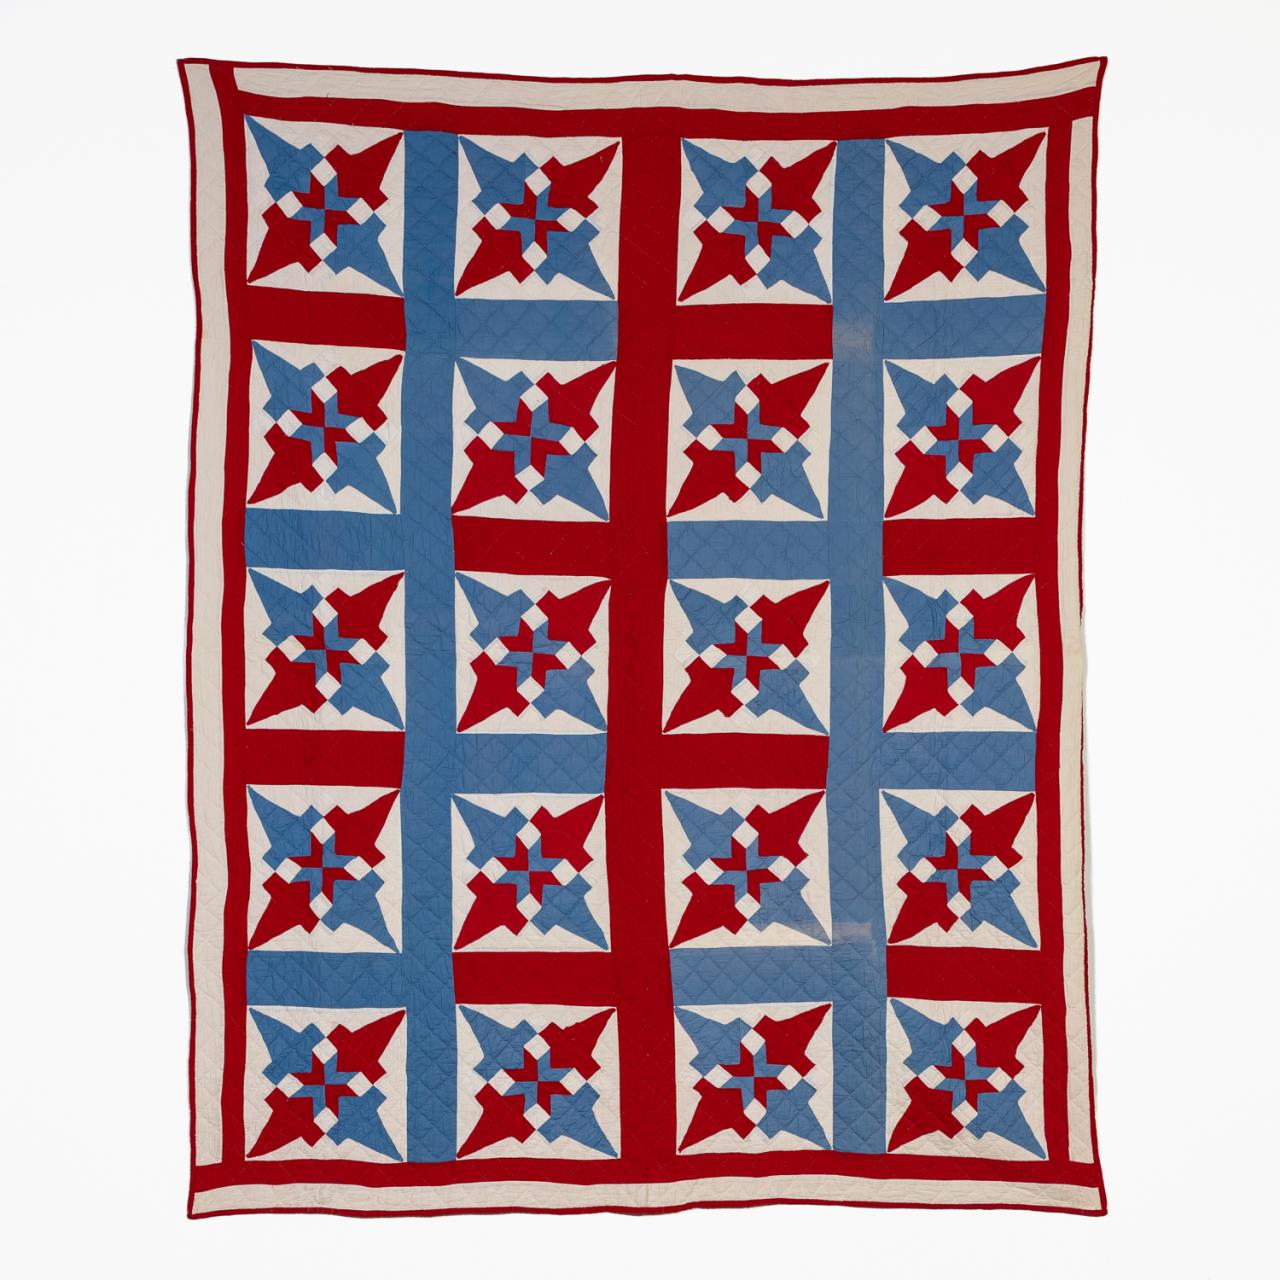 HAND QUILTED COTTON FOUR POINT